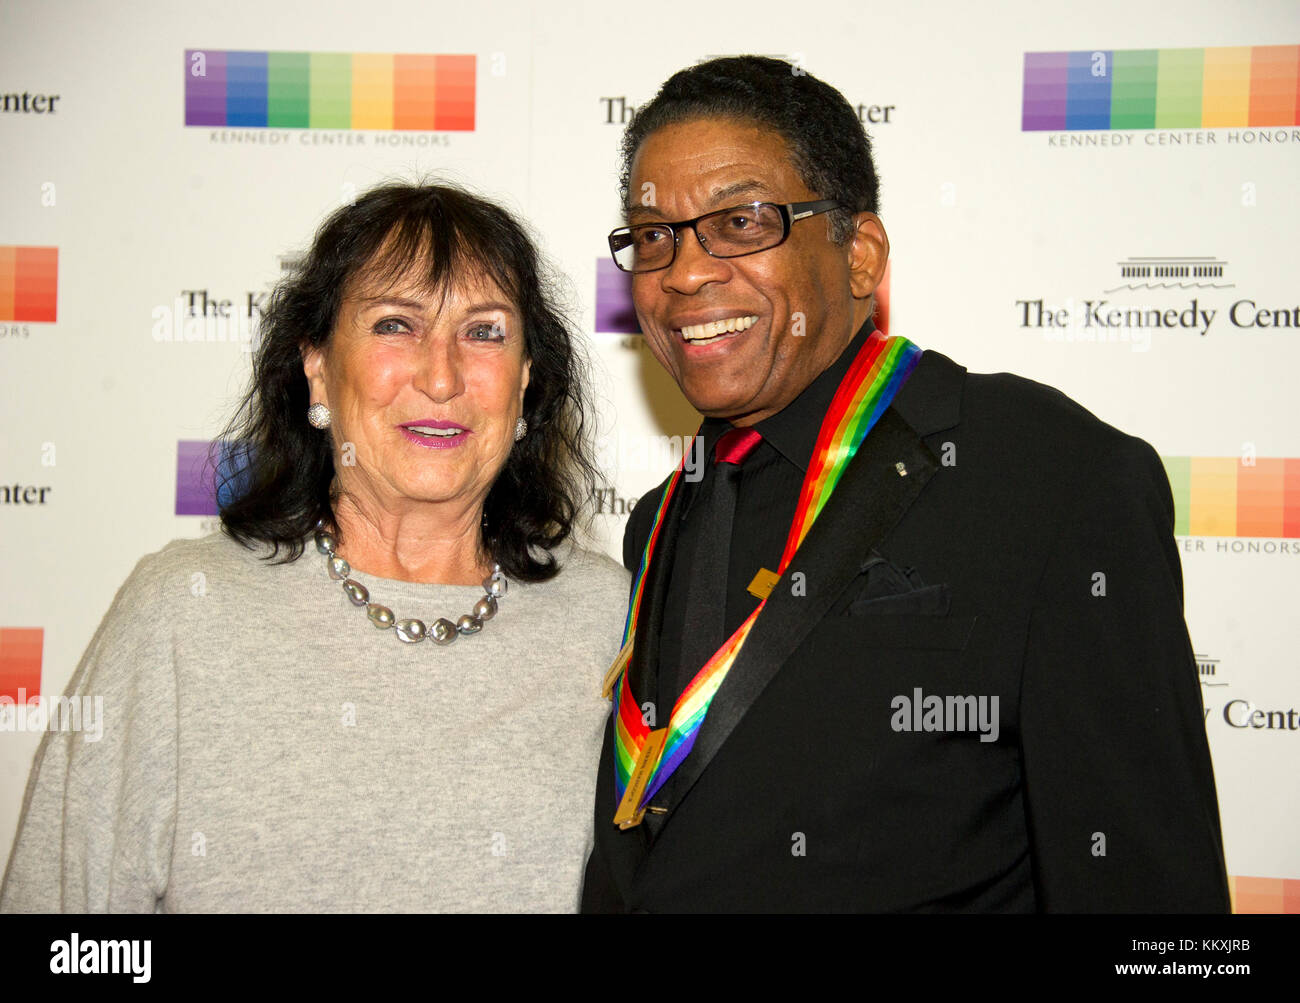 Herbie Hancock and his wife, Gigi Hancock, arrive for the formal Artist's Dinner honoring the recipients of the 40th Annual Kennedy Center Honors hosted by United States Secretary of State Rex Tillerson at the US Department of State in Washington, DC on Saturday, December 2, 2017. The 2017 honorees are: American dancer and choreographer Carmen de Lavallade; Cuban American singer-songwriter and actress Gloria Estefan; American hip hop artist and entertainment icon LL COOL J; American television writer and producer Norman Lear; and American musician and record producer Lionel Richie. Credit: R Stock Photo